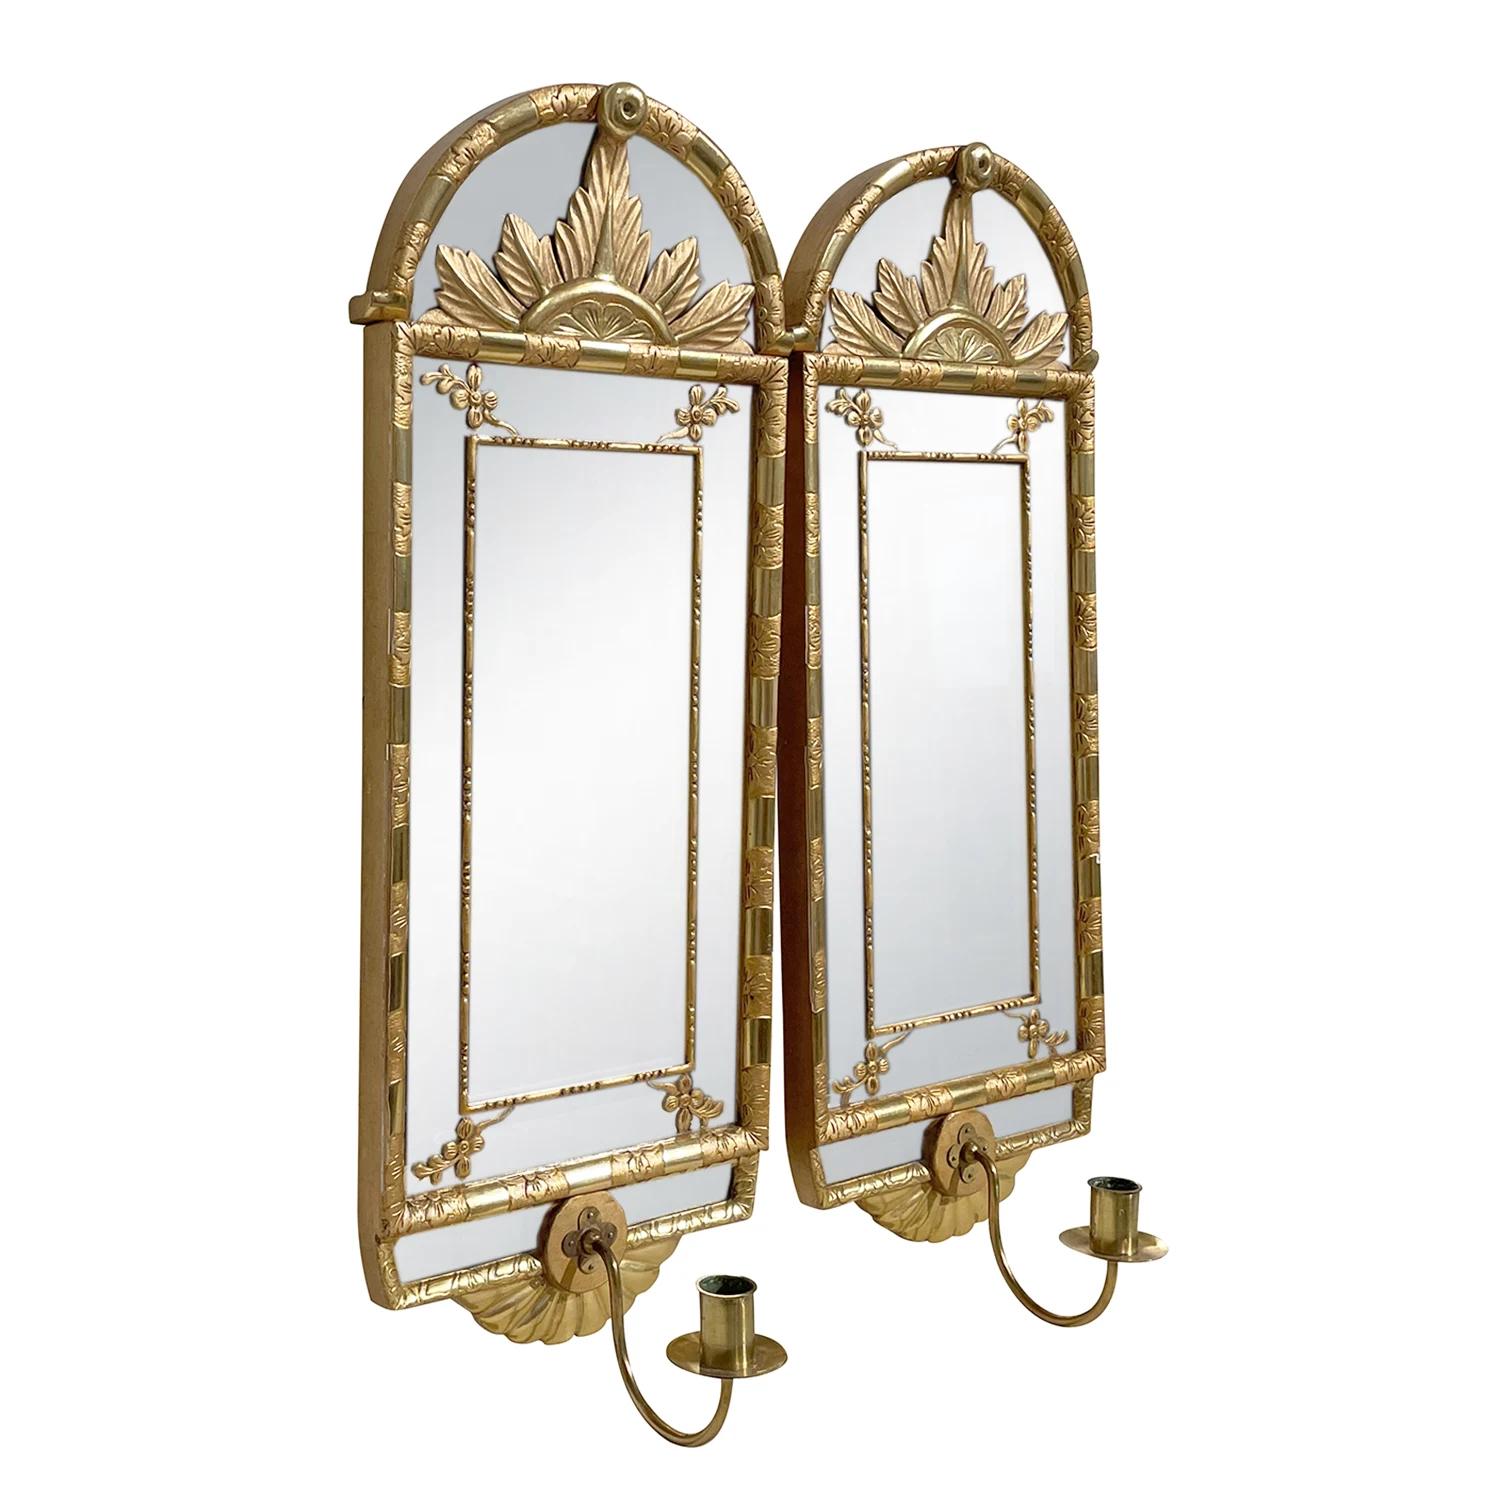 A gold, antique Swedish Gustavian pair of wall mirrors with its original mirrored glass, made of hand crafted gilded Pinewood, designed by Carl A. Carlsson in good condition. The Scandinavian wall décor is enhanced by detailed wood carvings. Singed